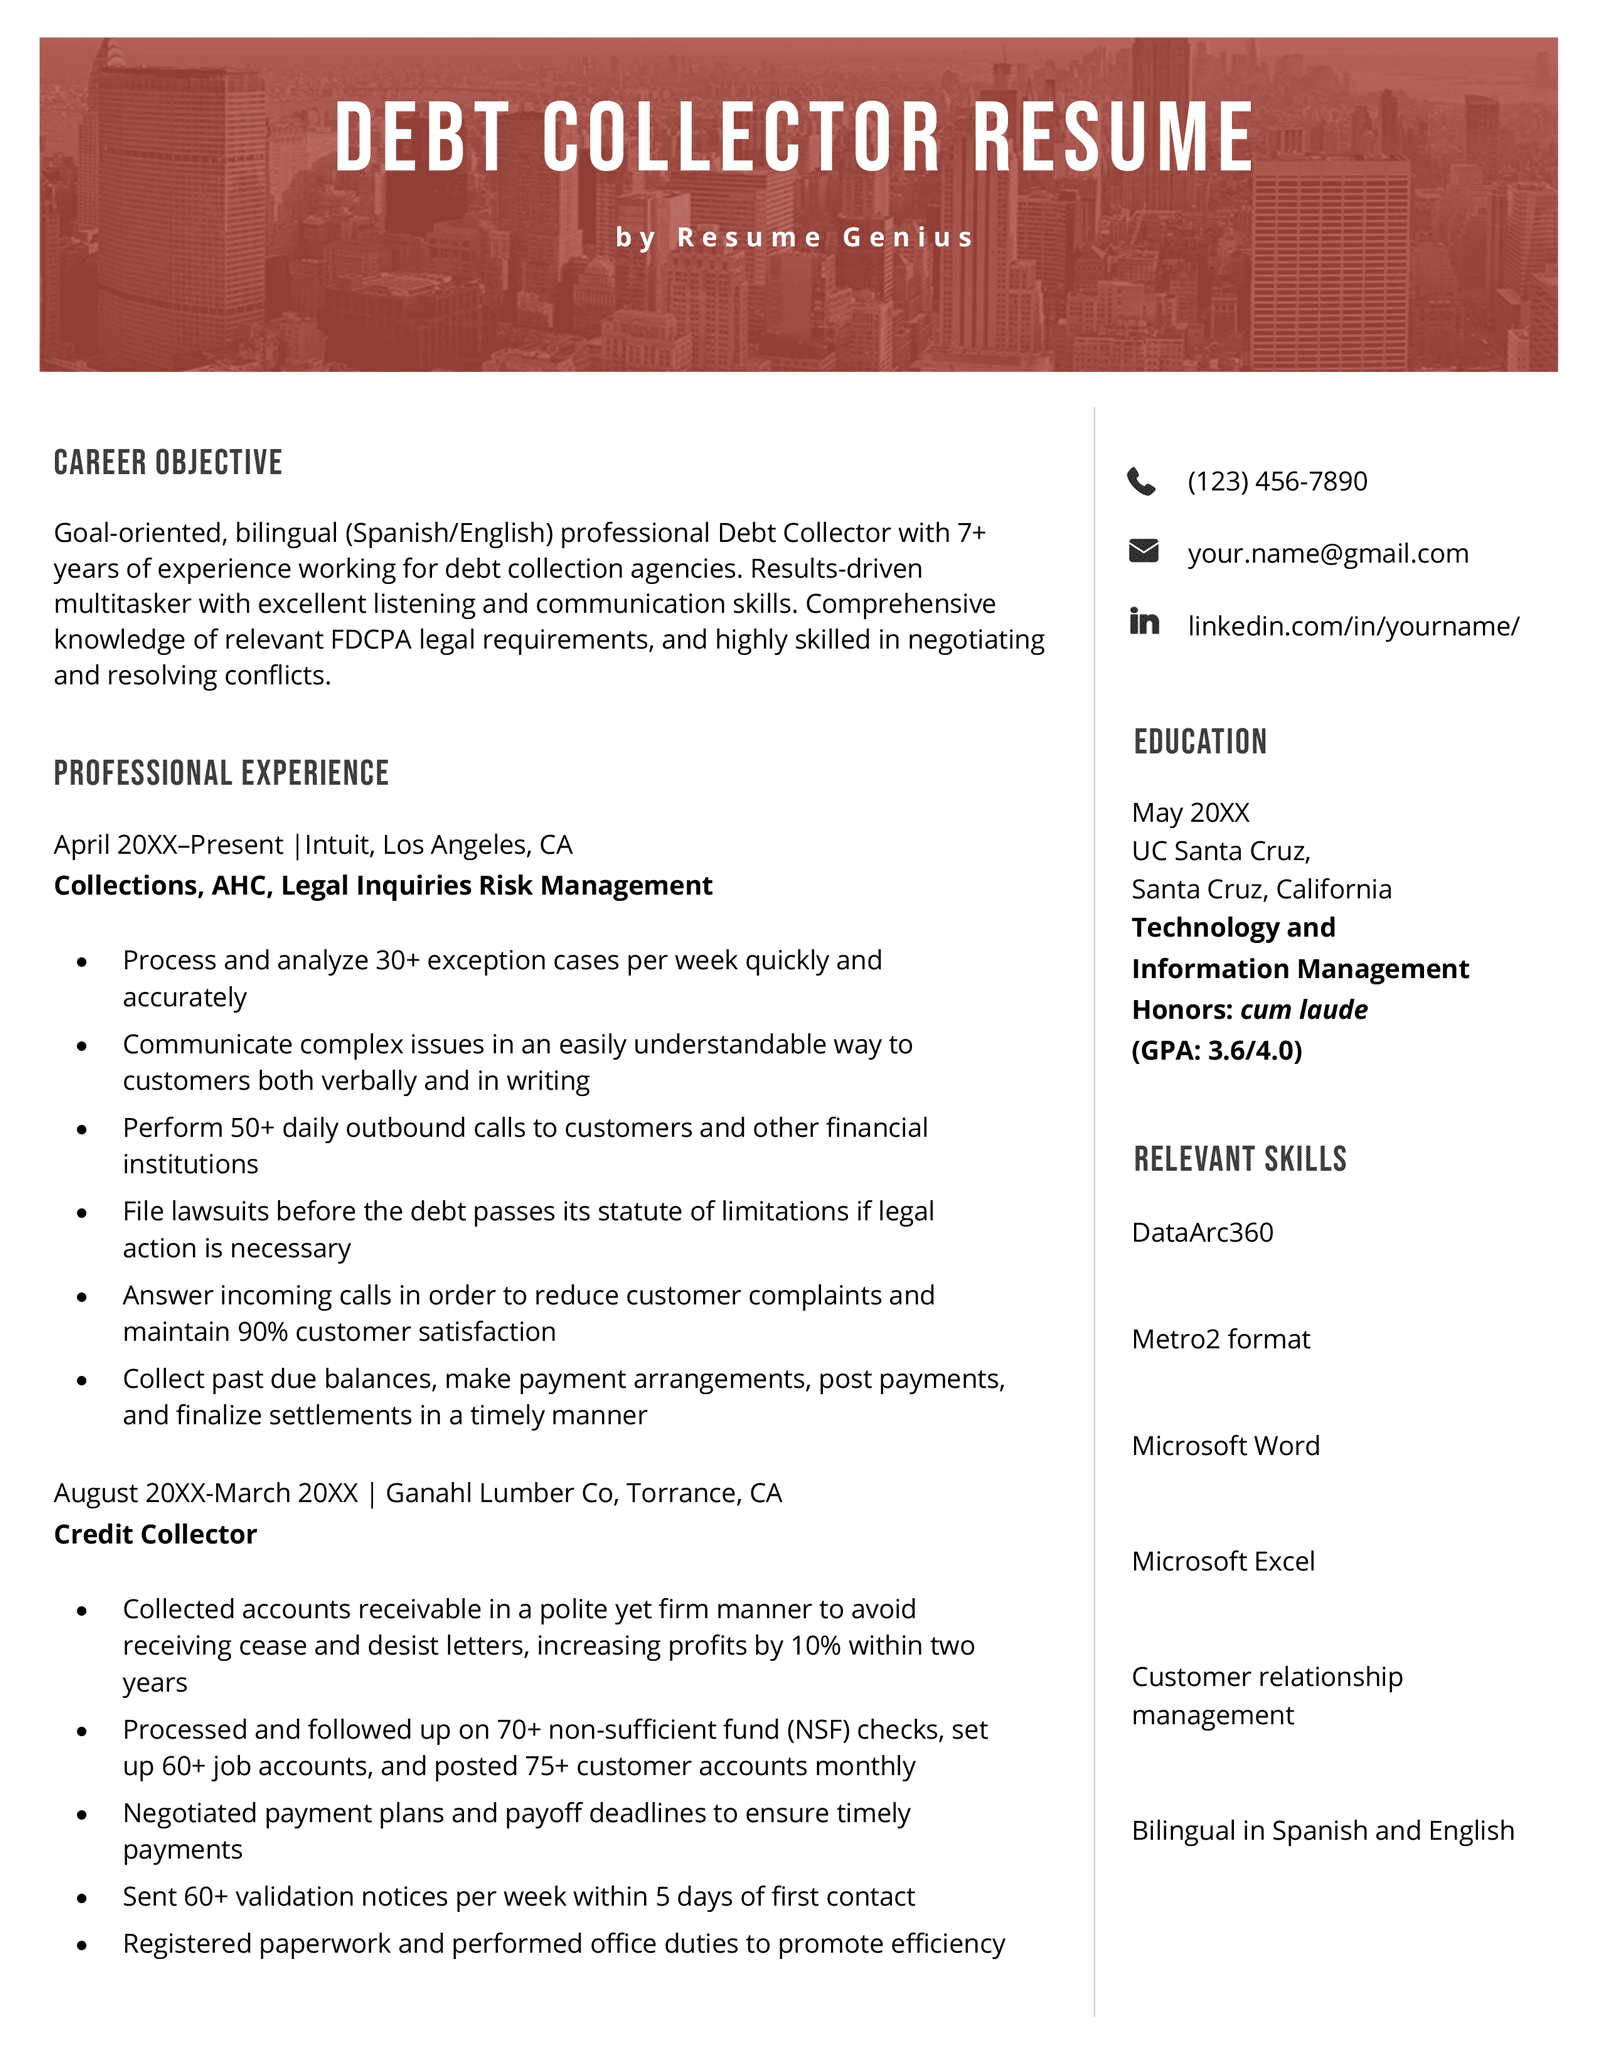 A debt collector resume example with a red header and a resume summary, work experience section, education section, and additional skills section